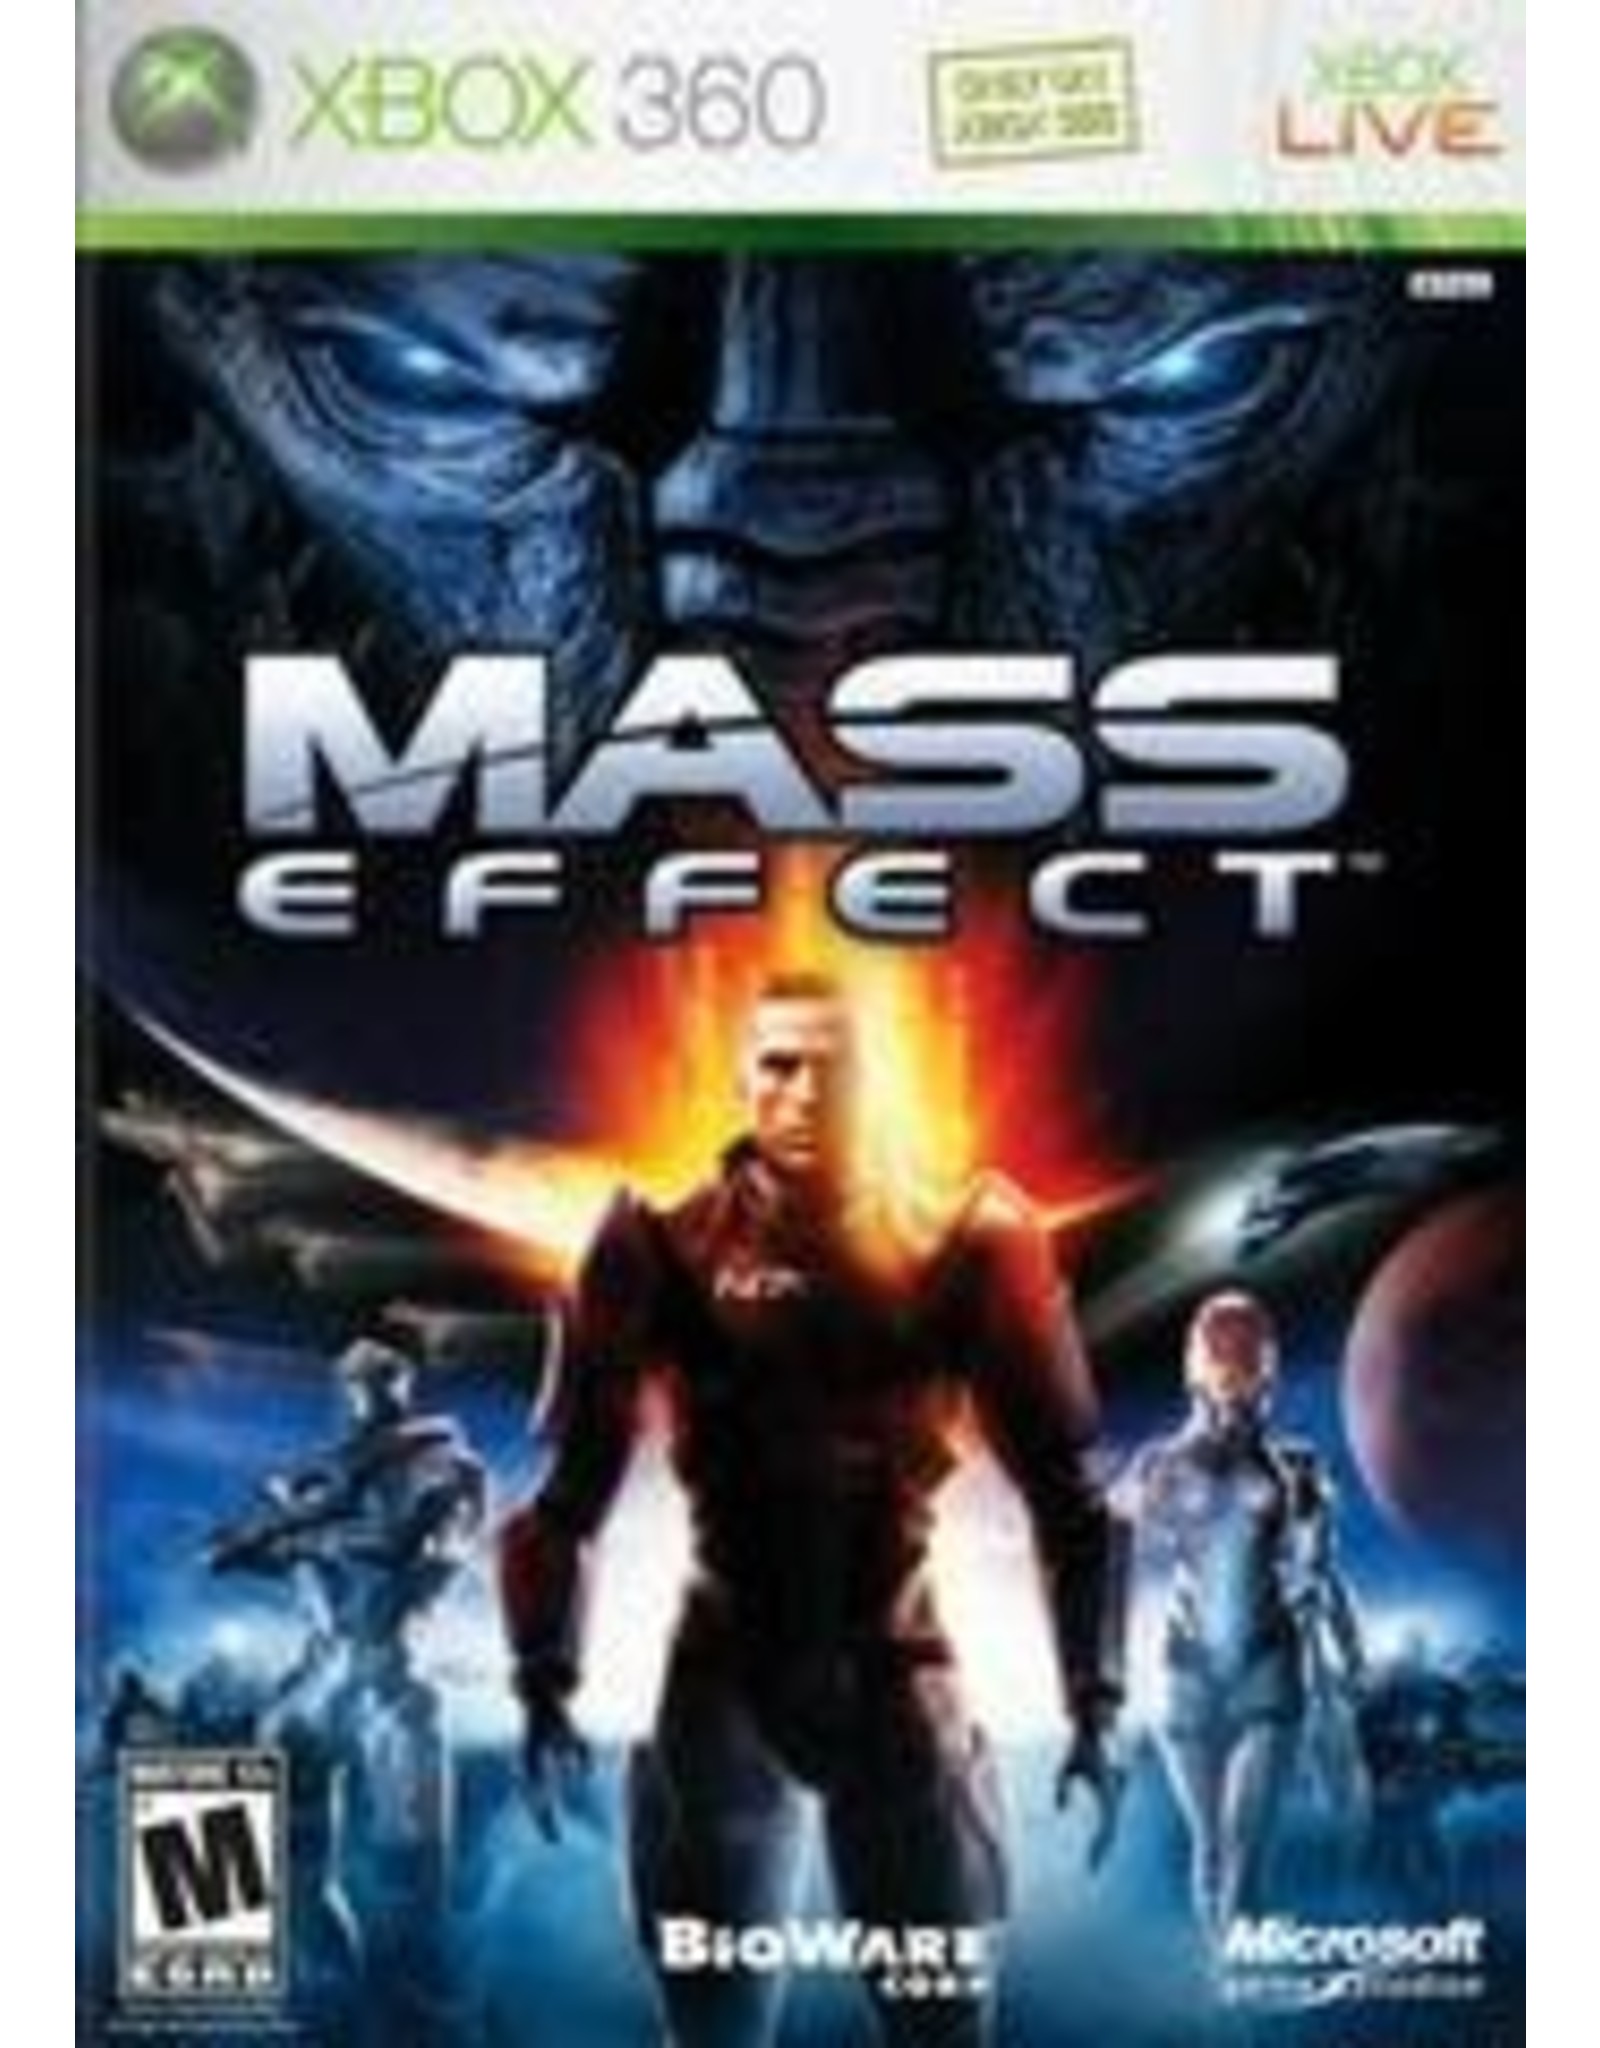 Xbox 360 Mass Effect (Used)